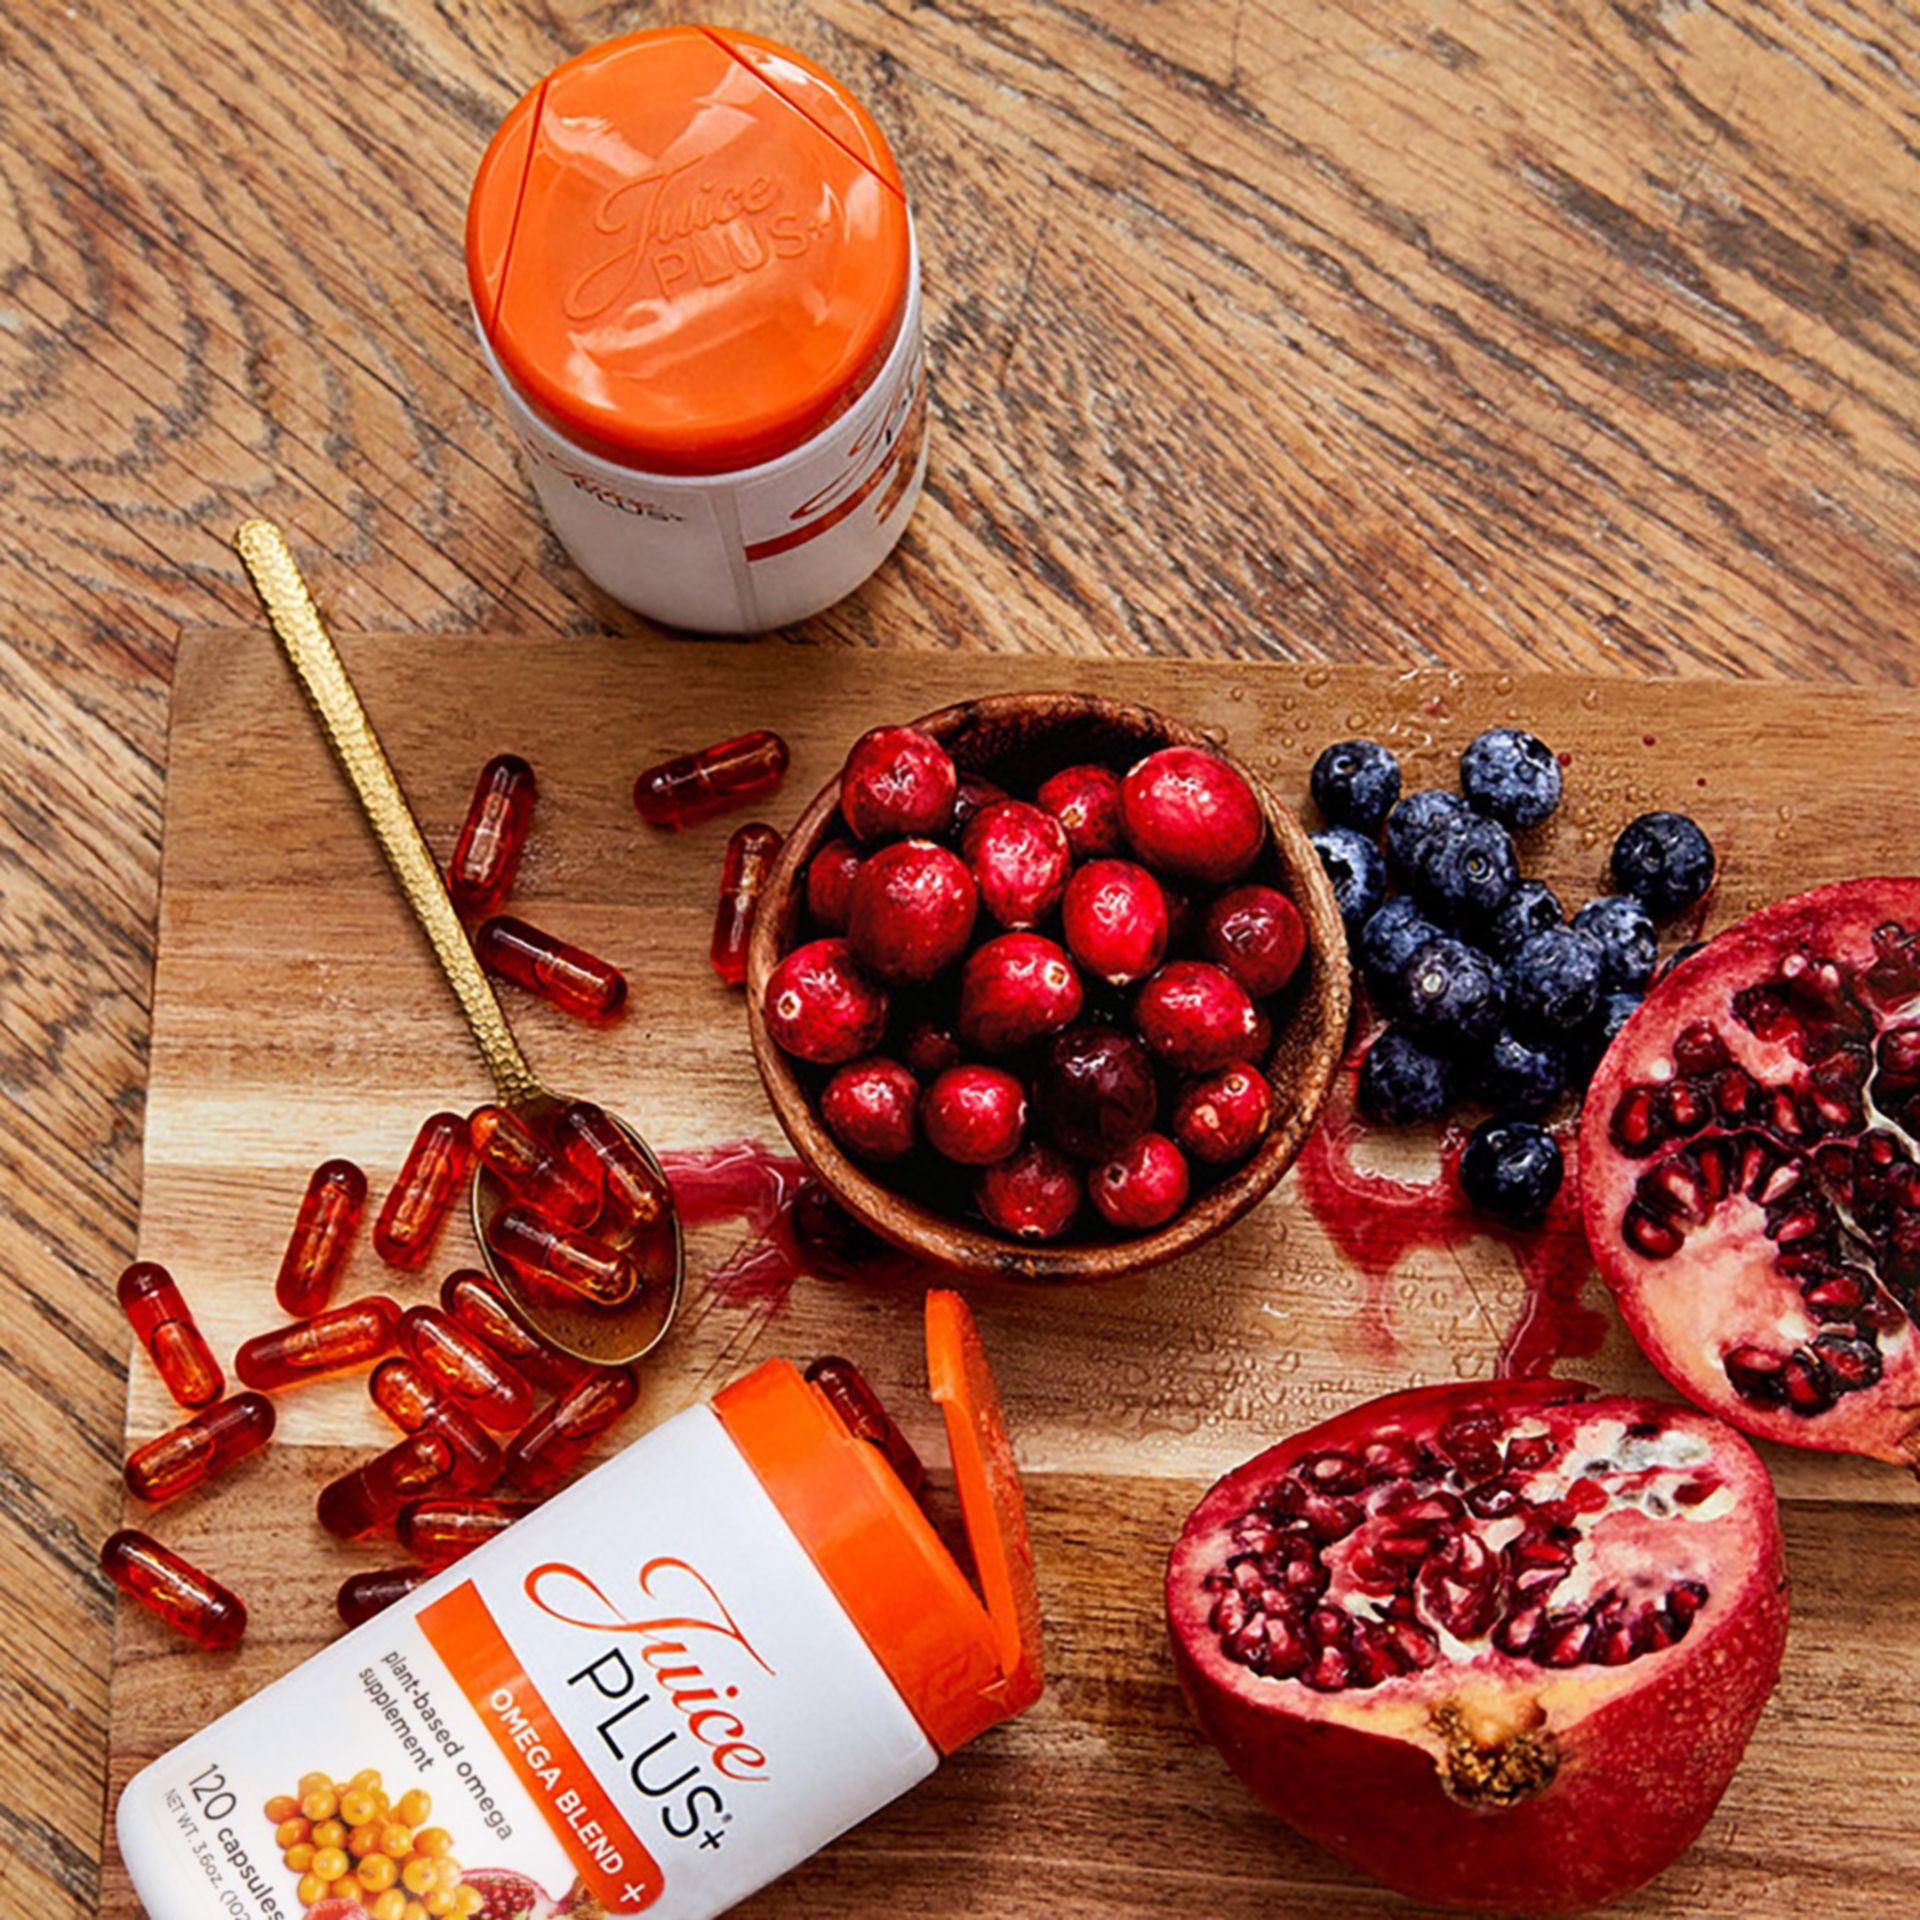 What is in Omega Blend from Juice Plus+?